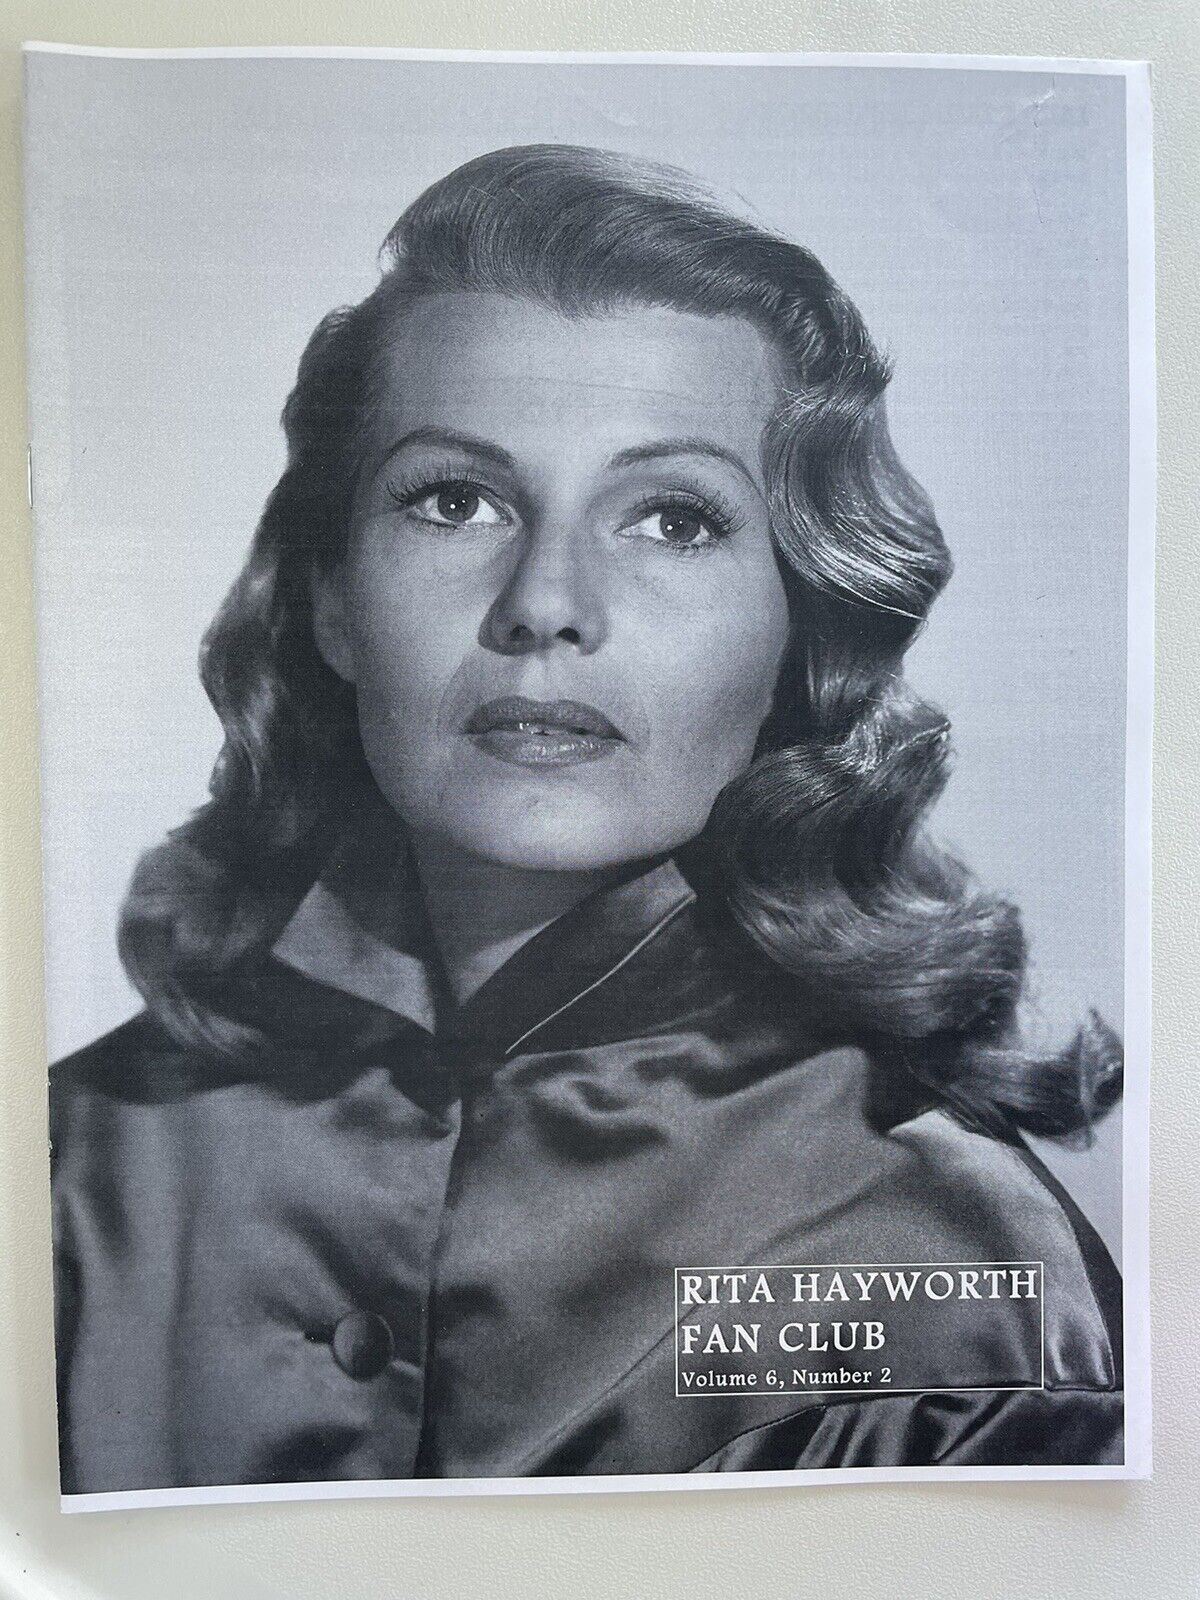 RITA HAYWORTH Fan Club Newsletter, 4 Issues, Rare Photos, 32 Pages Total